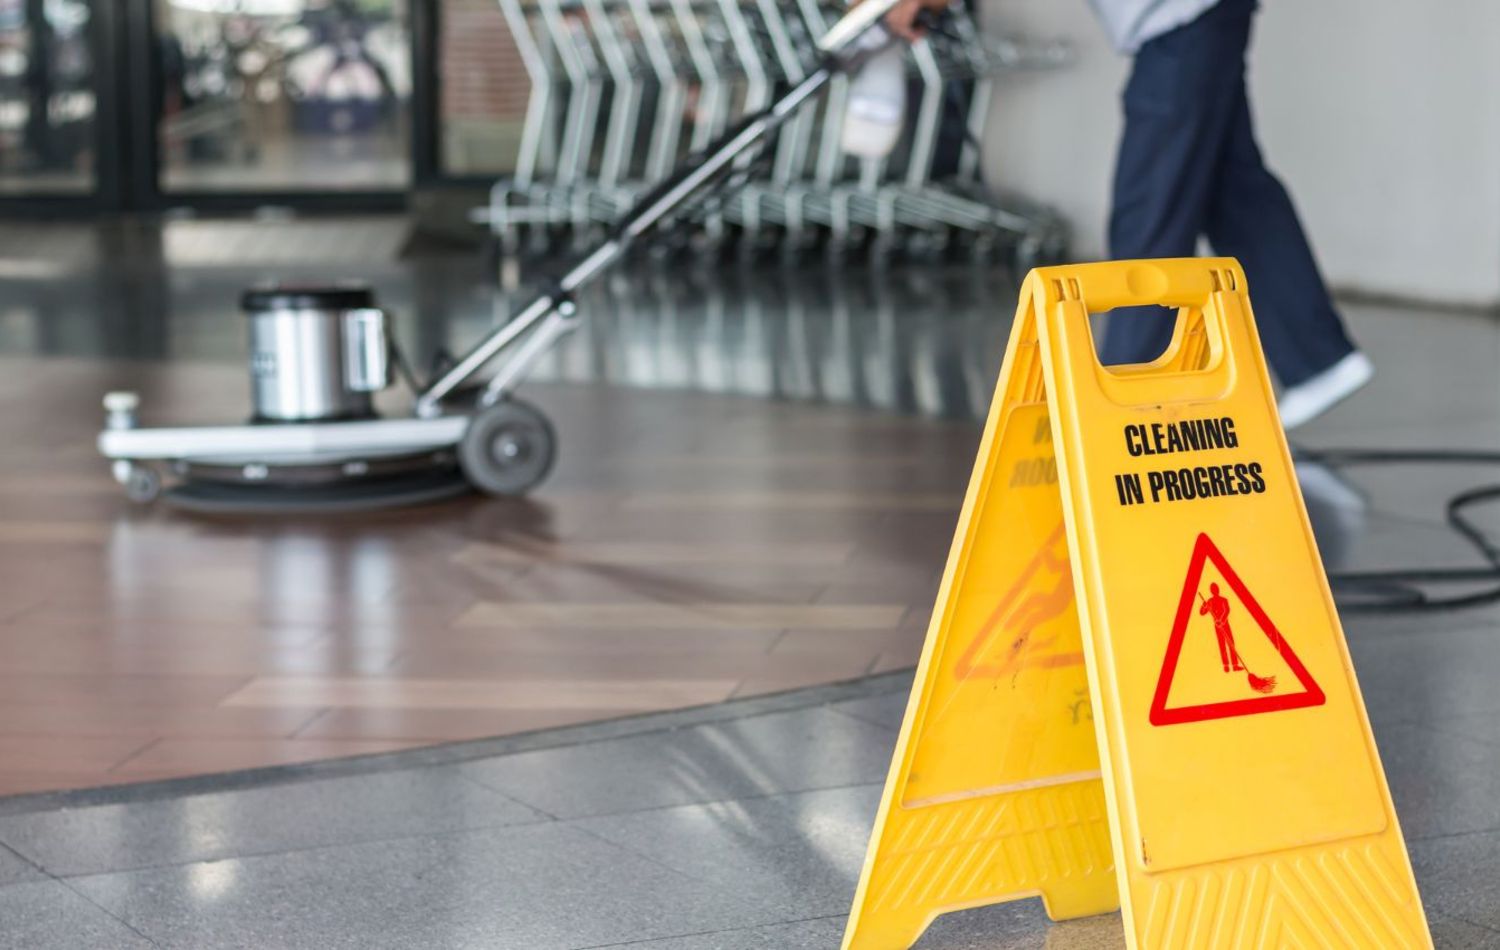 Cleaning in progress sign with a person buffering a floor